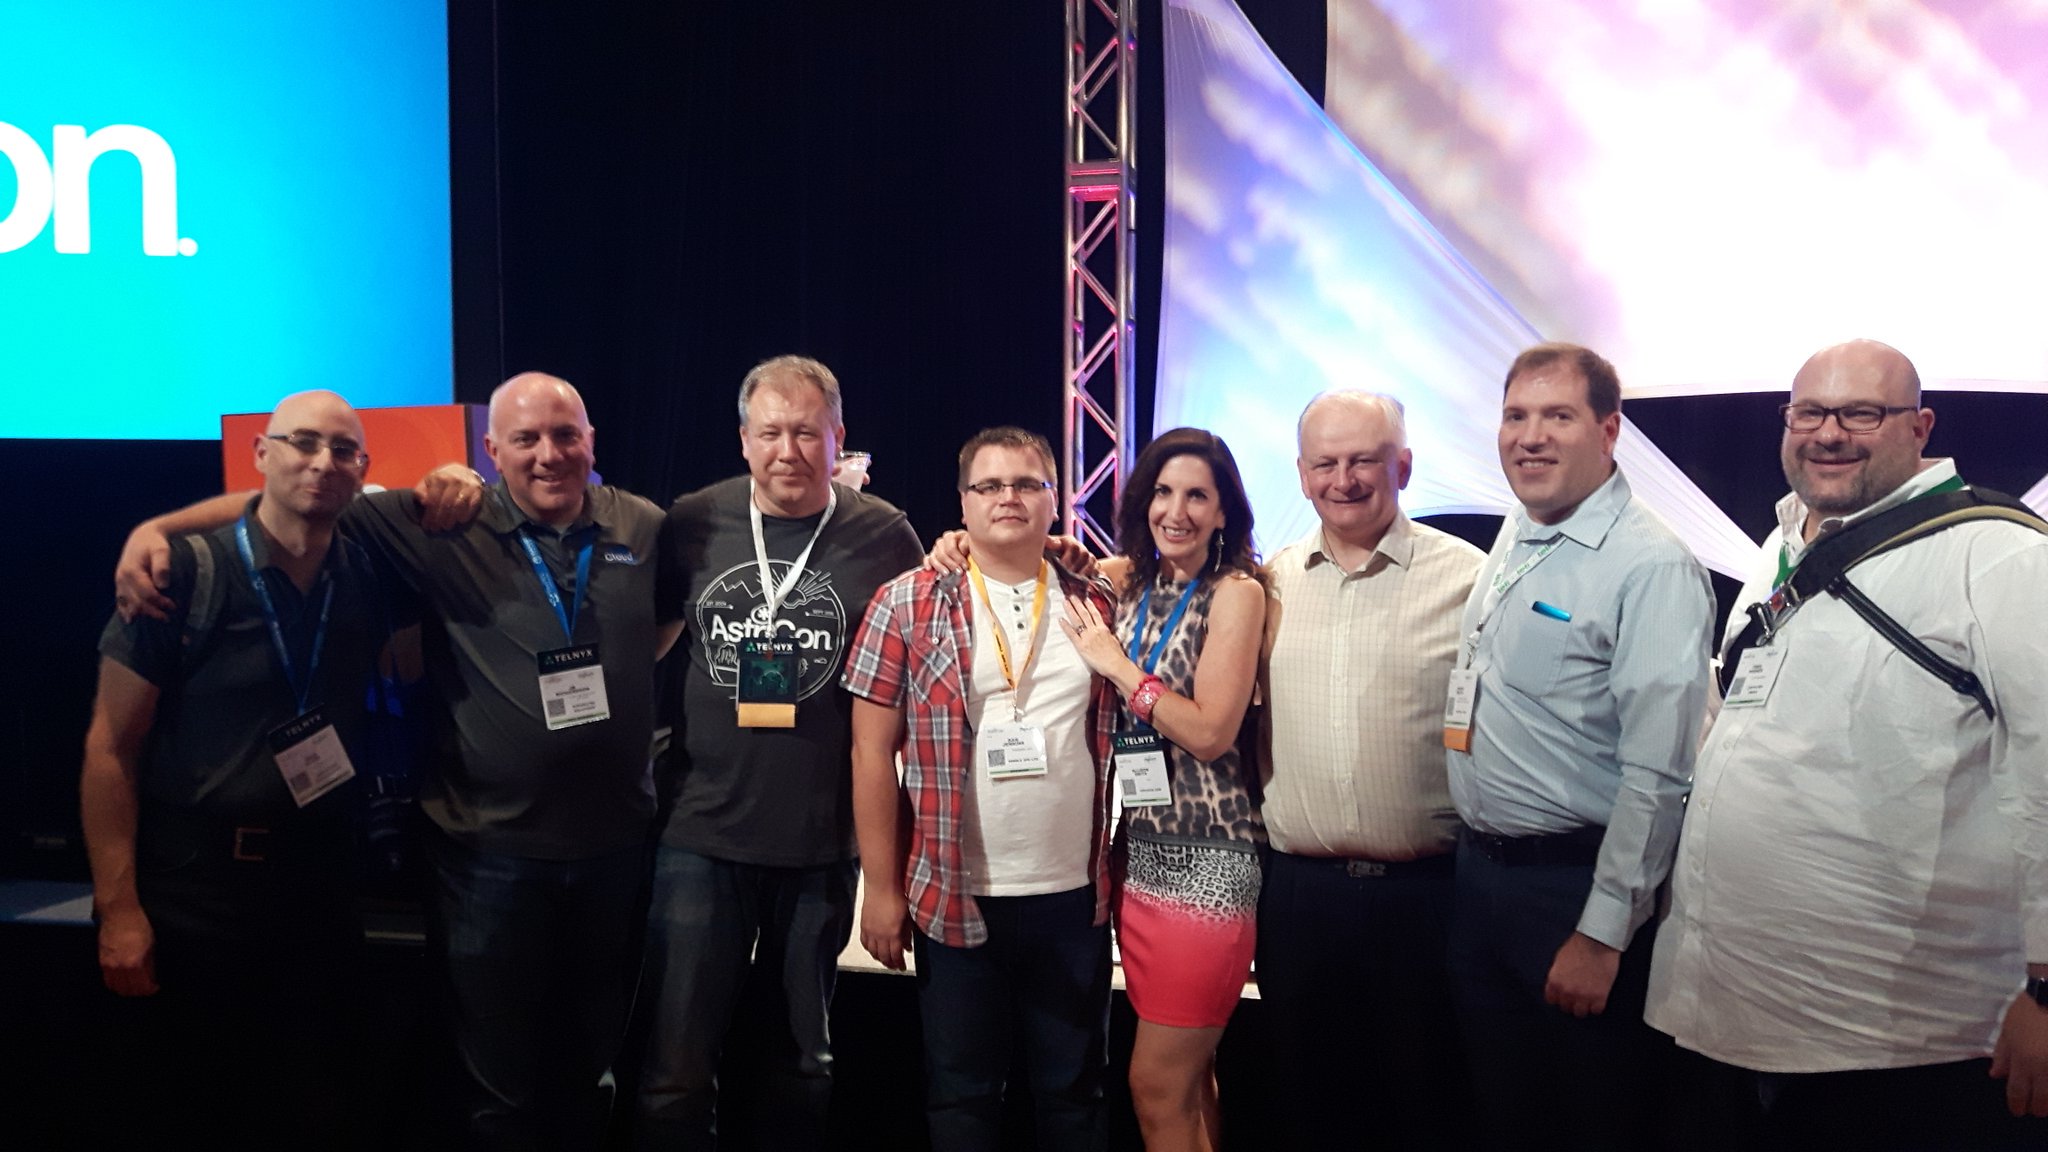 Photo of Fred and friends at Astricon